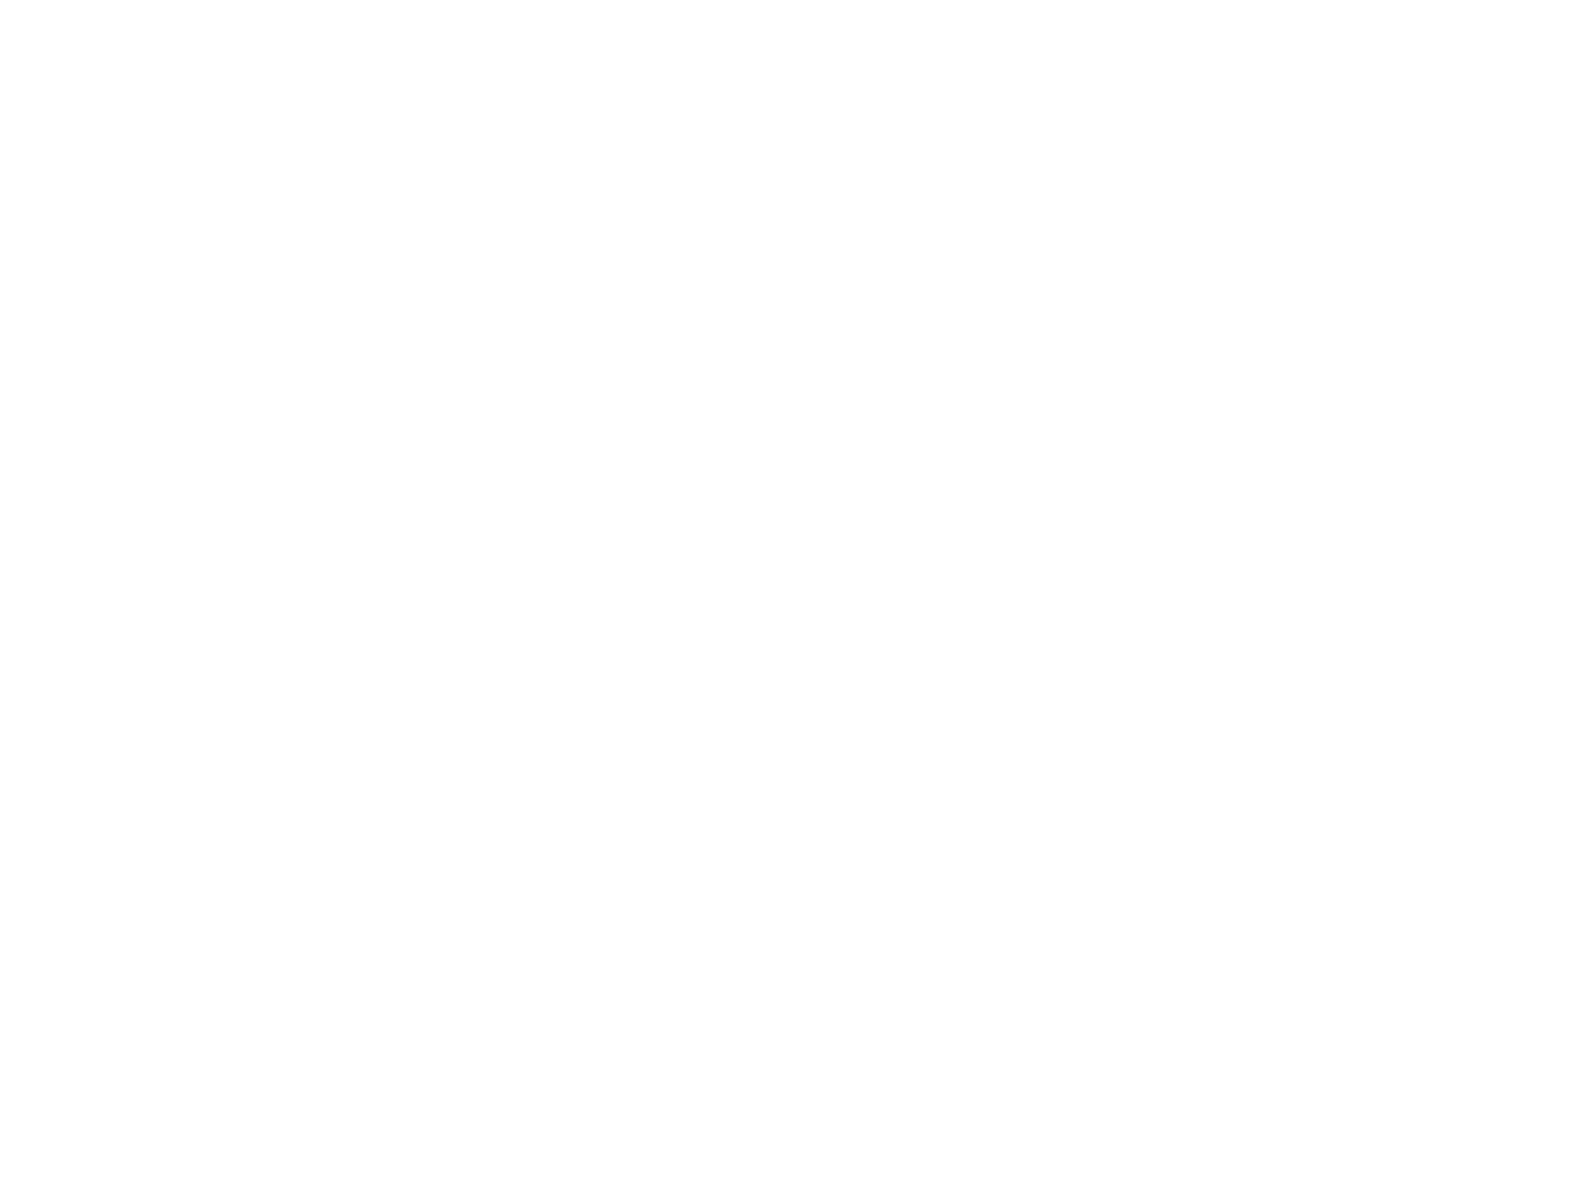 Global Unichip Corp. logo for dark backgrounds (transparent PNG)